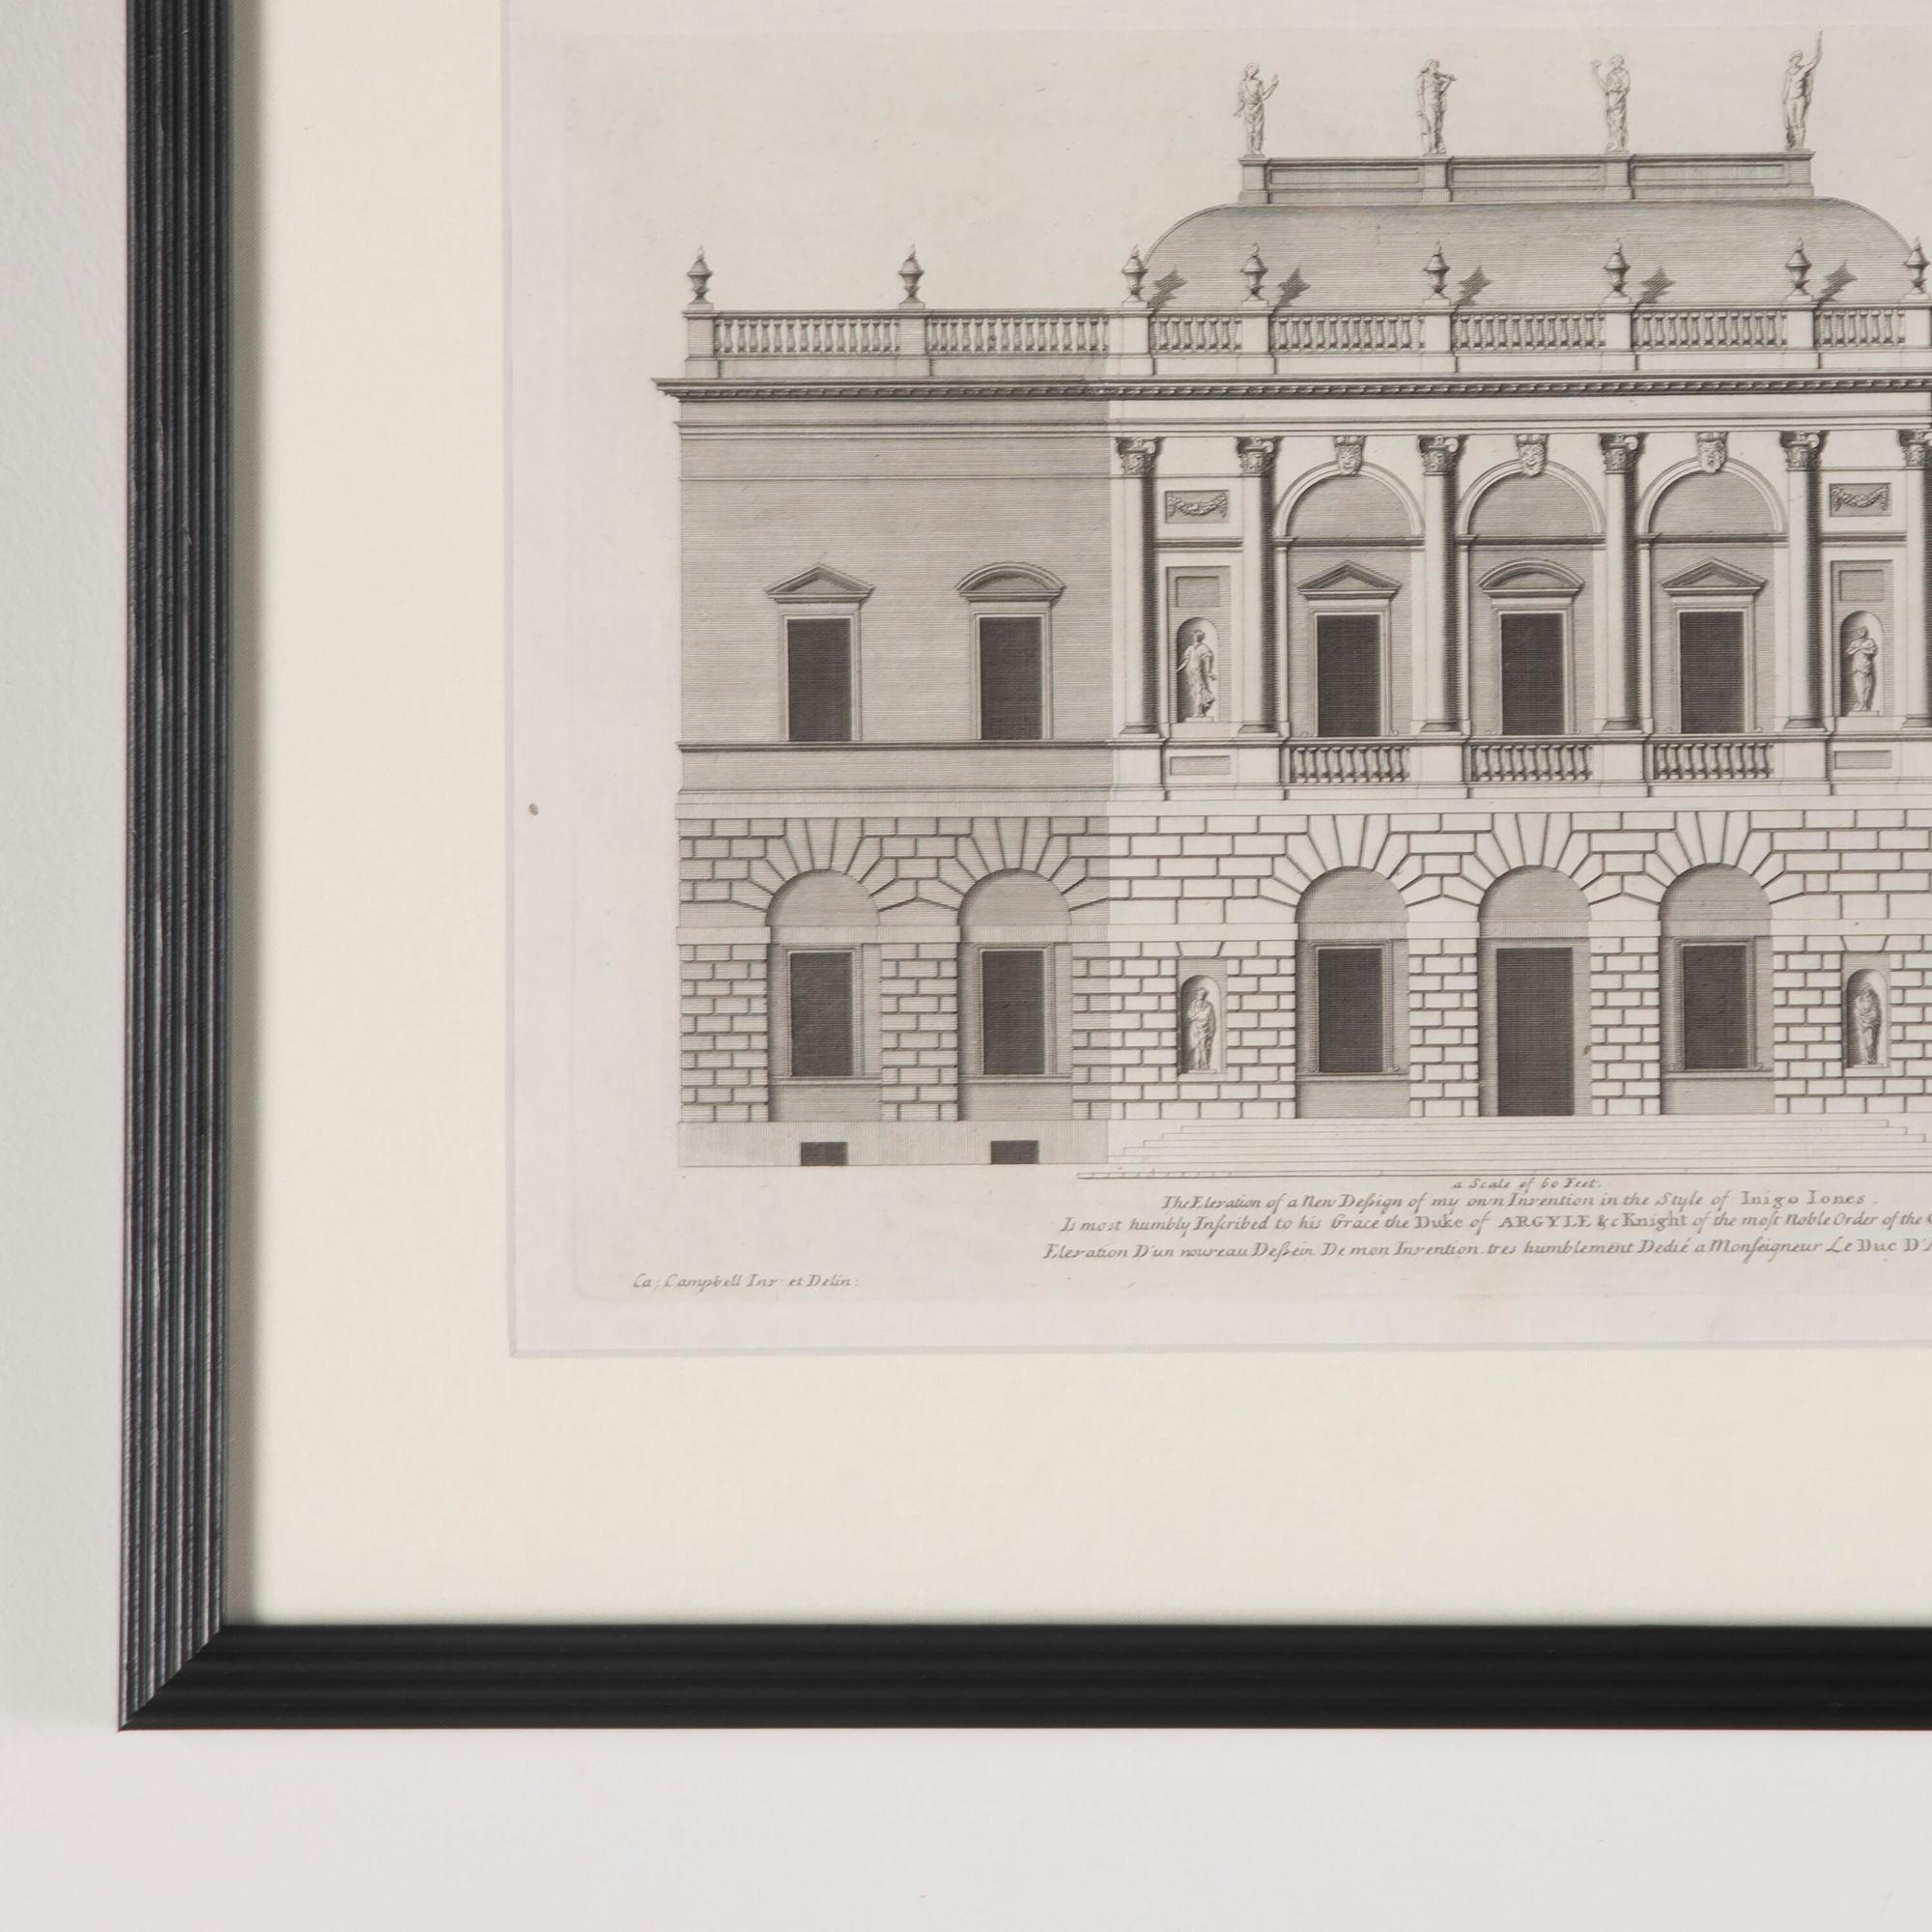 Set of six early 18th Century Architectural engravings by Sir Colin Campbell. 
Sir Colin Campbell’s “Vitruvius Brittanicus” is widely recognised and considered a classic for 18th Century British architecture.
Campbell was an assistant to the Earl